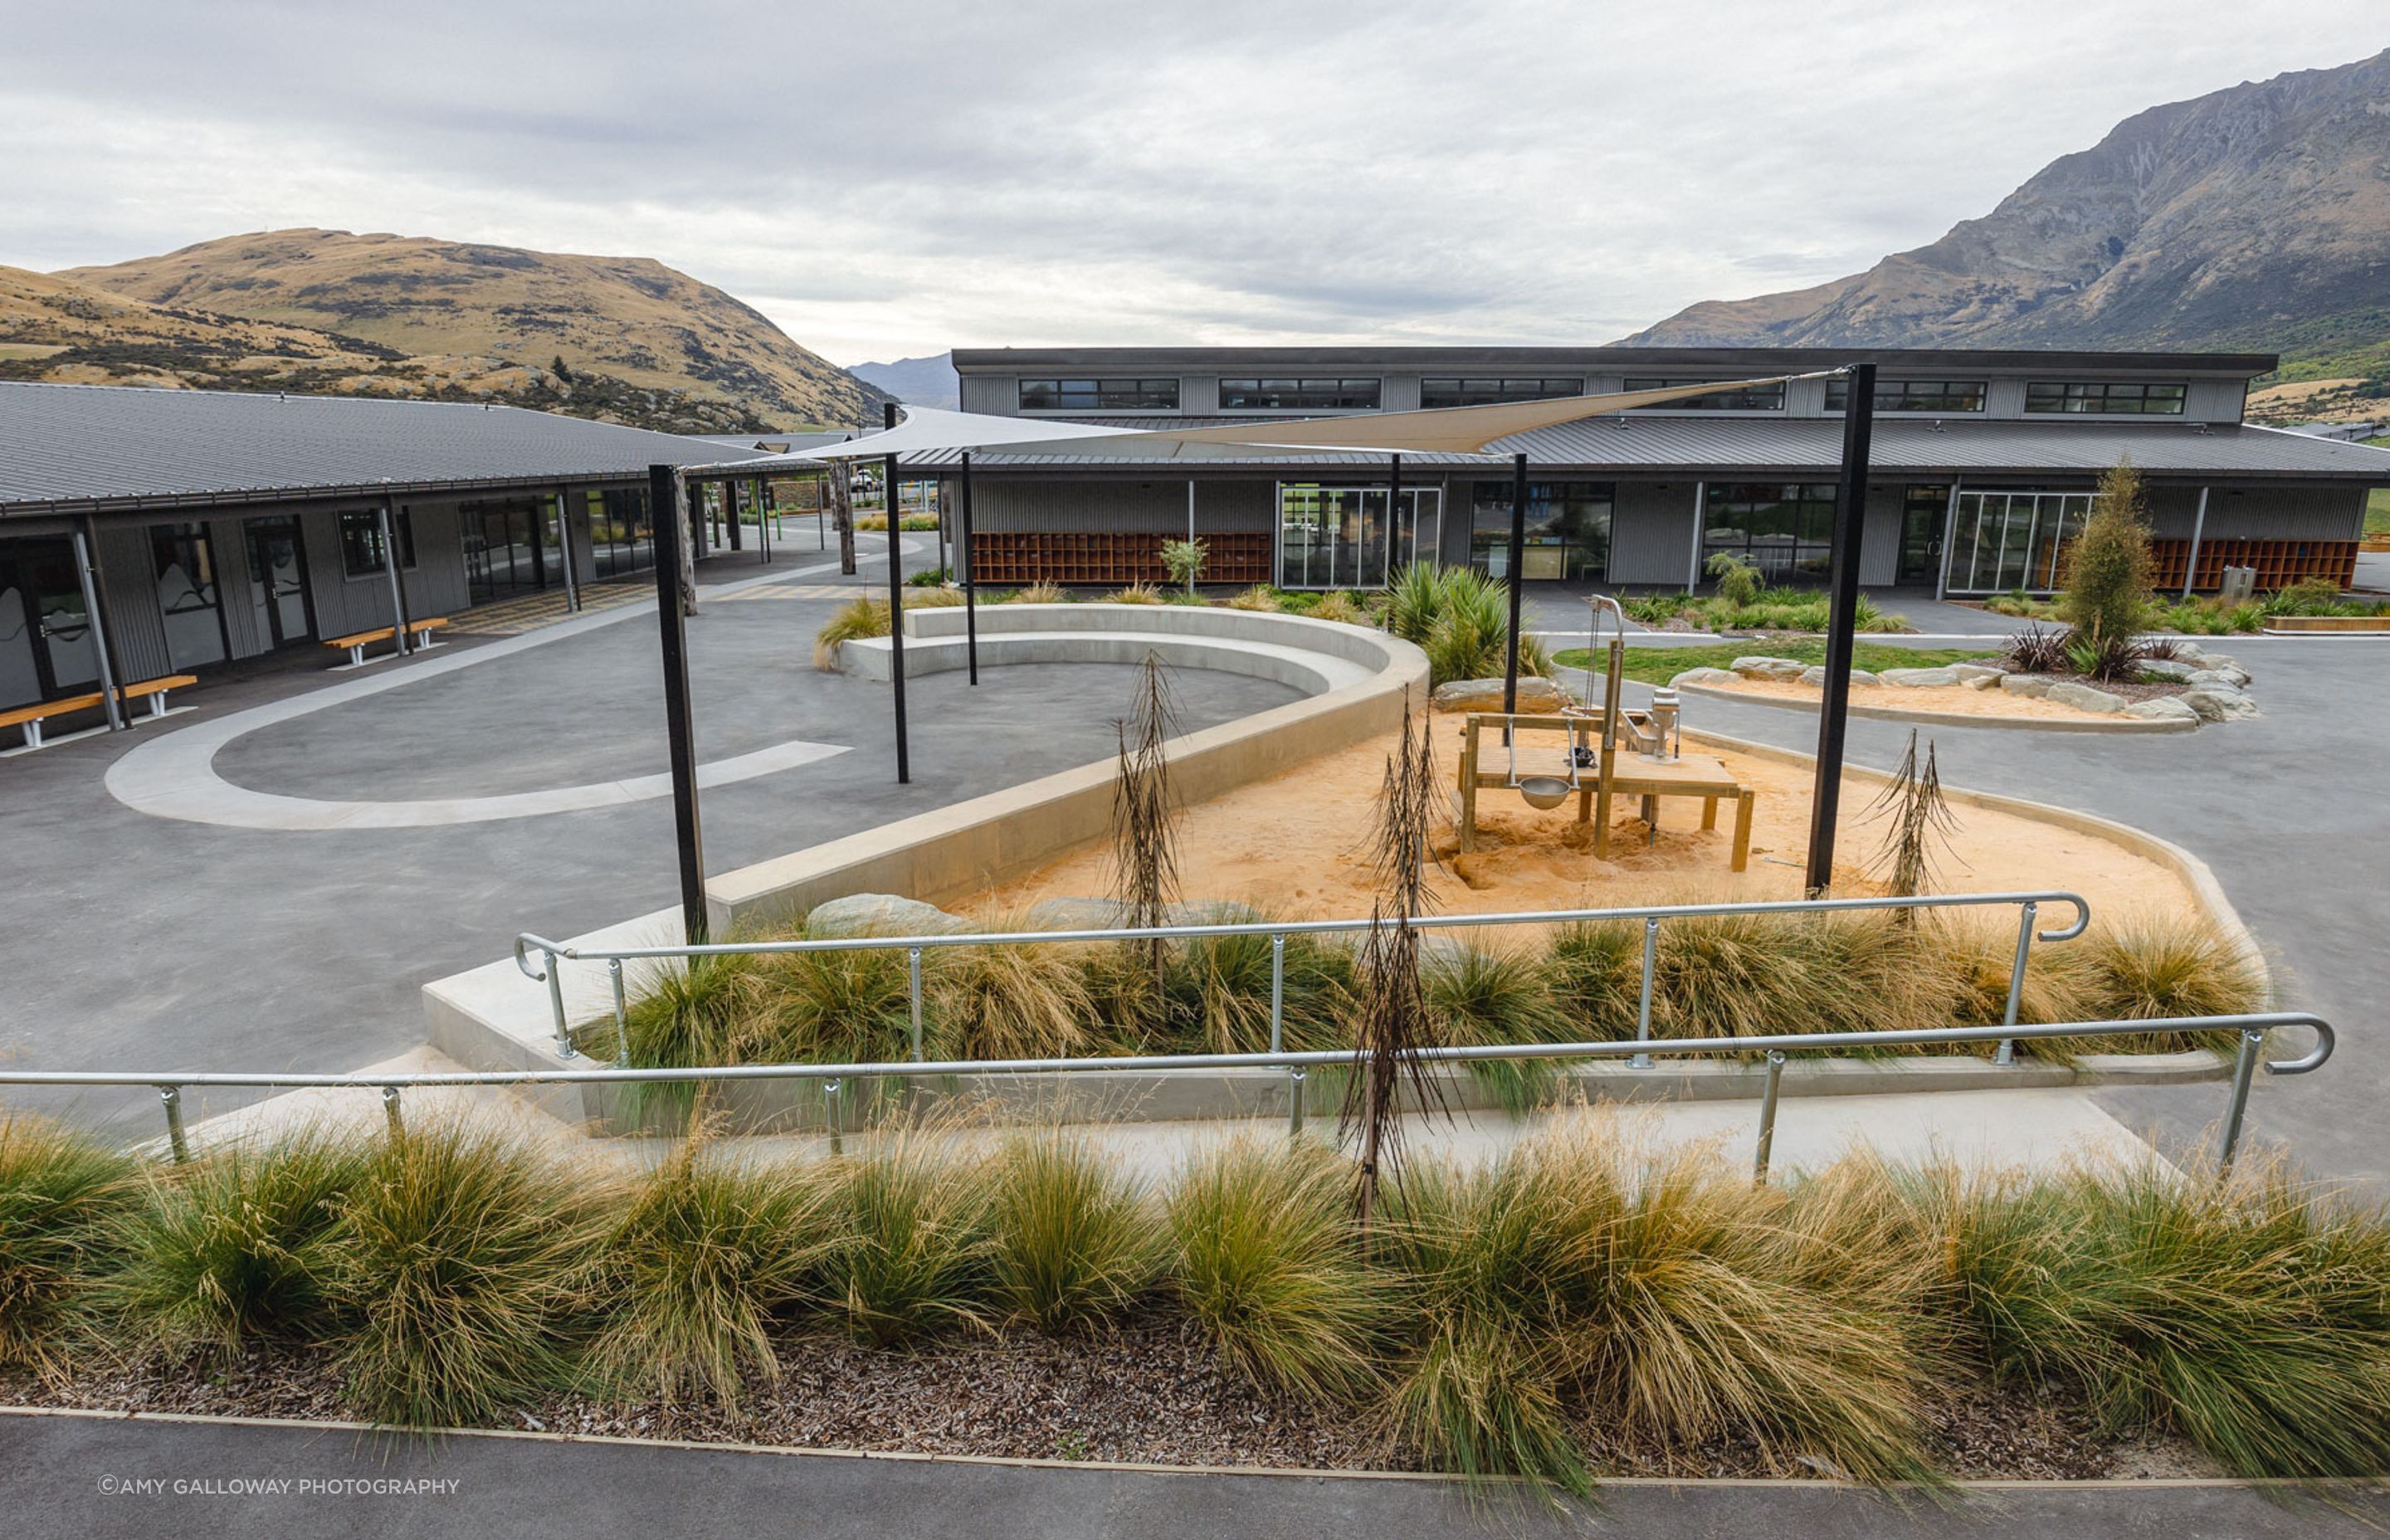 The landscape at Te Kura Whakatipu o Kawarau was designed around outdoor learning and play spaces that reflect the culture and beauty of the area.